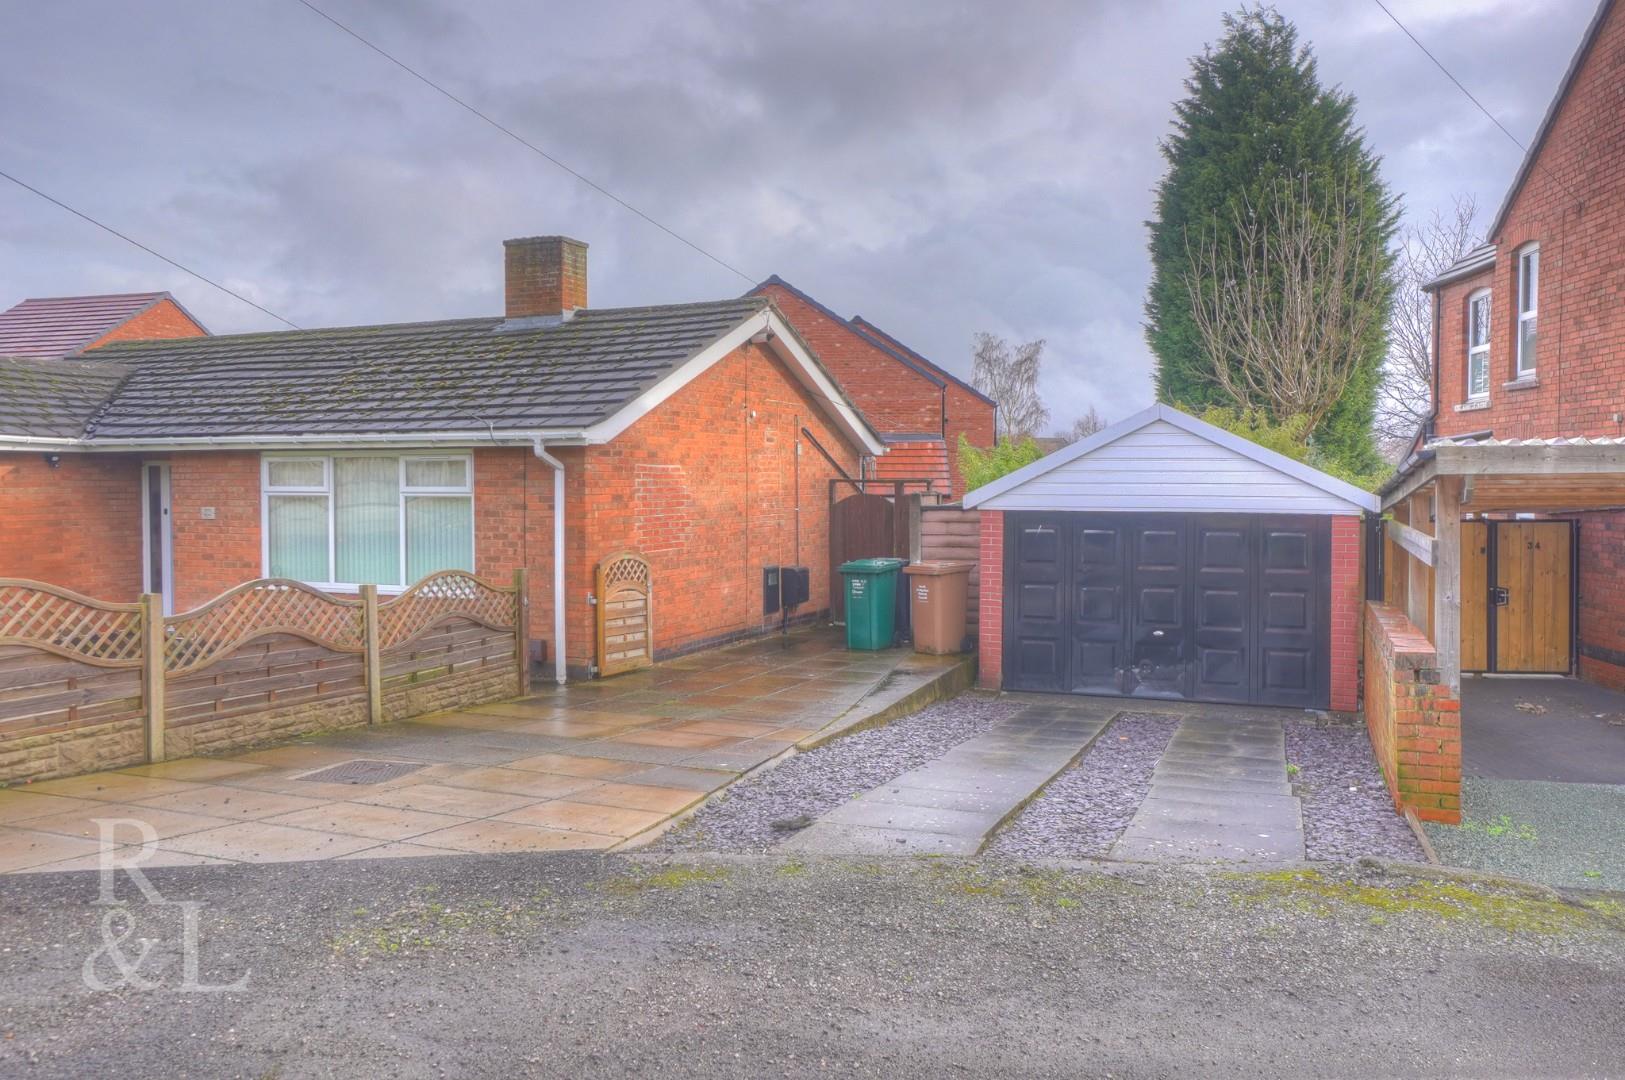 Property image for Meadow Lane, Newhall, Swadlincote